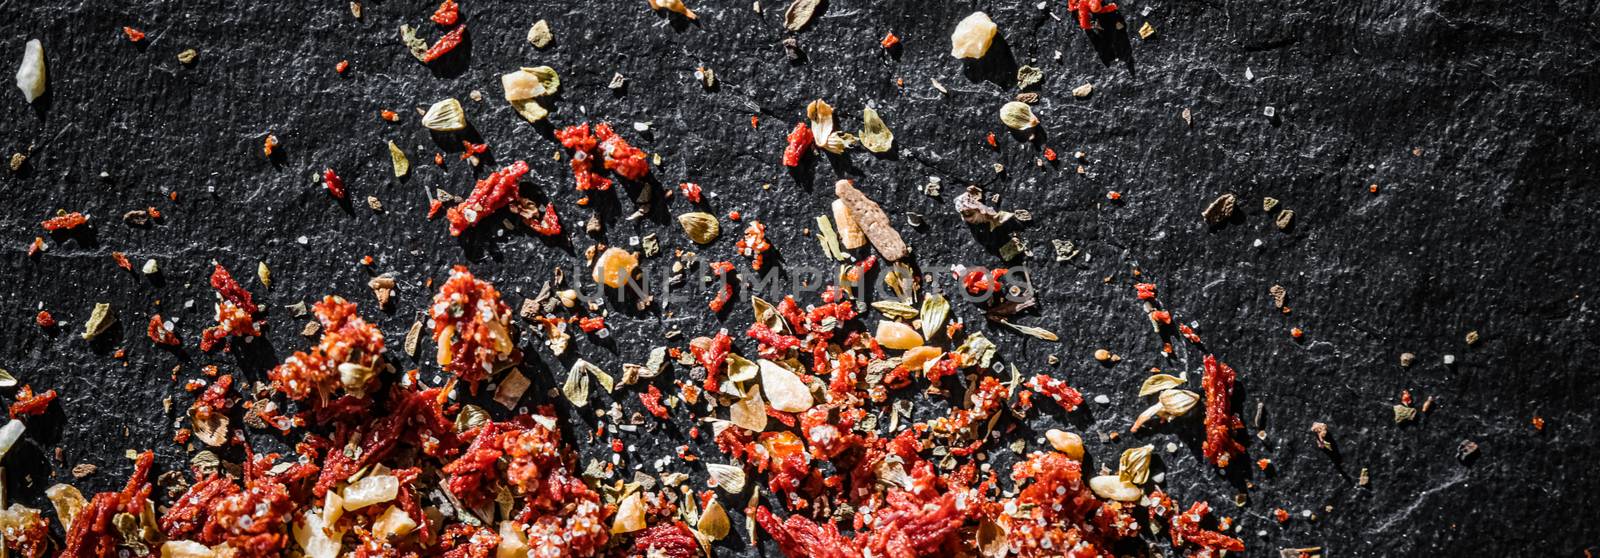 Dried tomato and chili pepper closeup on luxury stone background by Anneleven